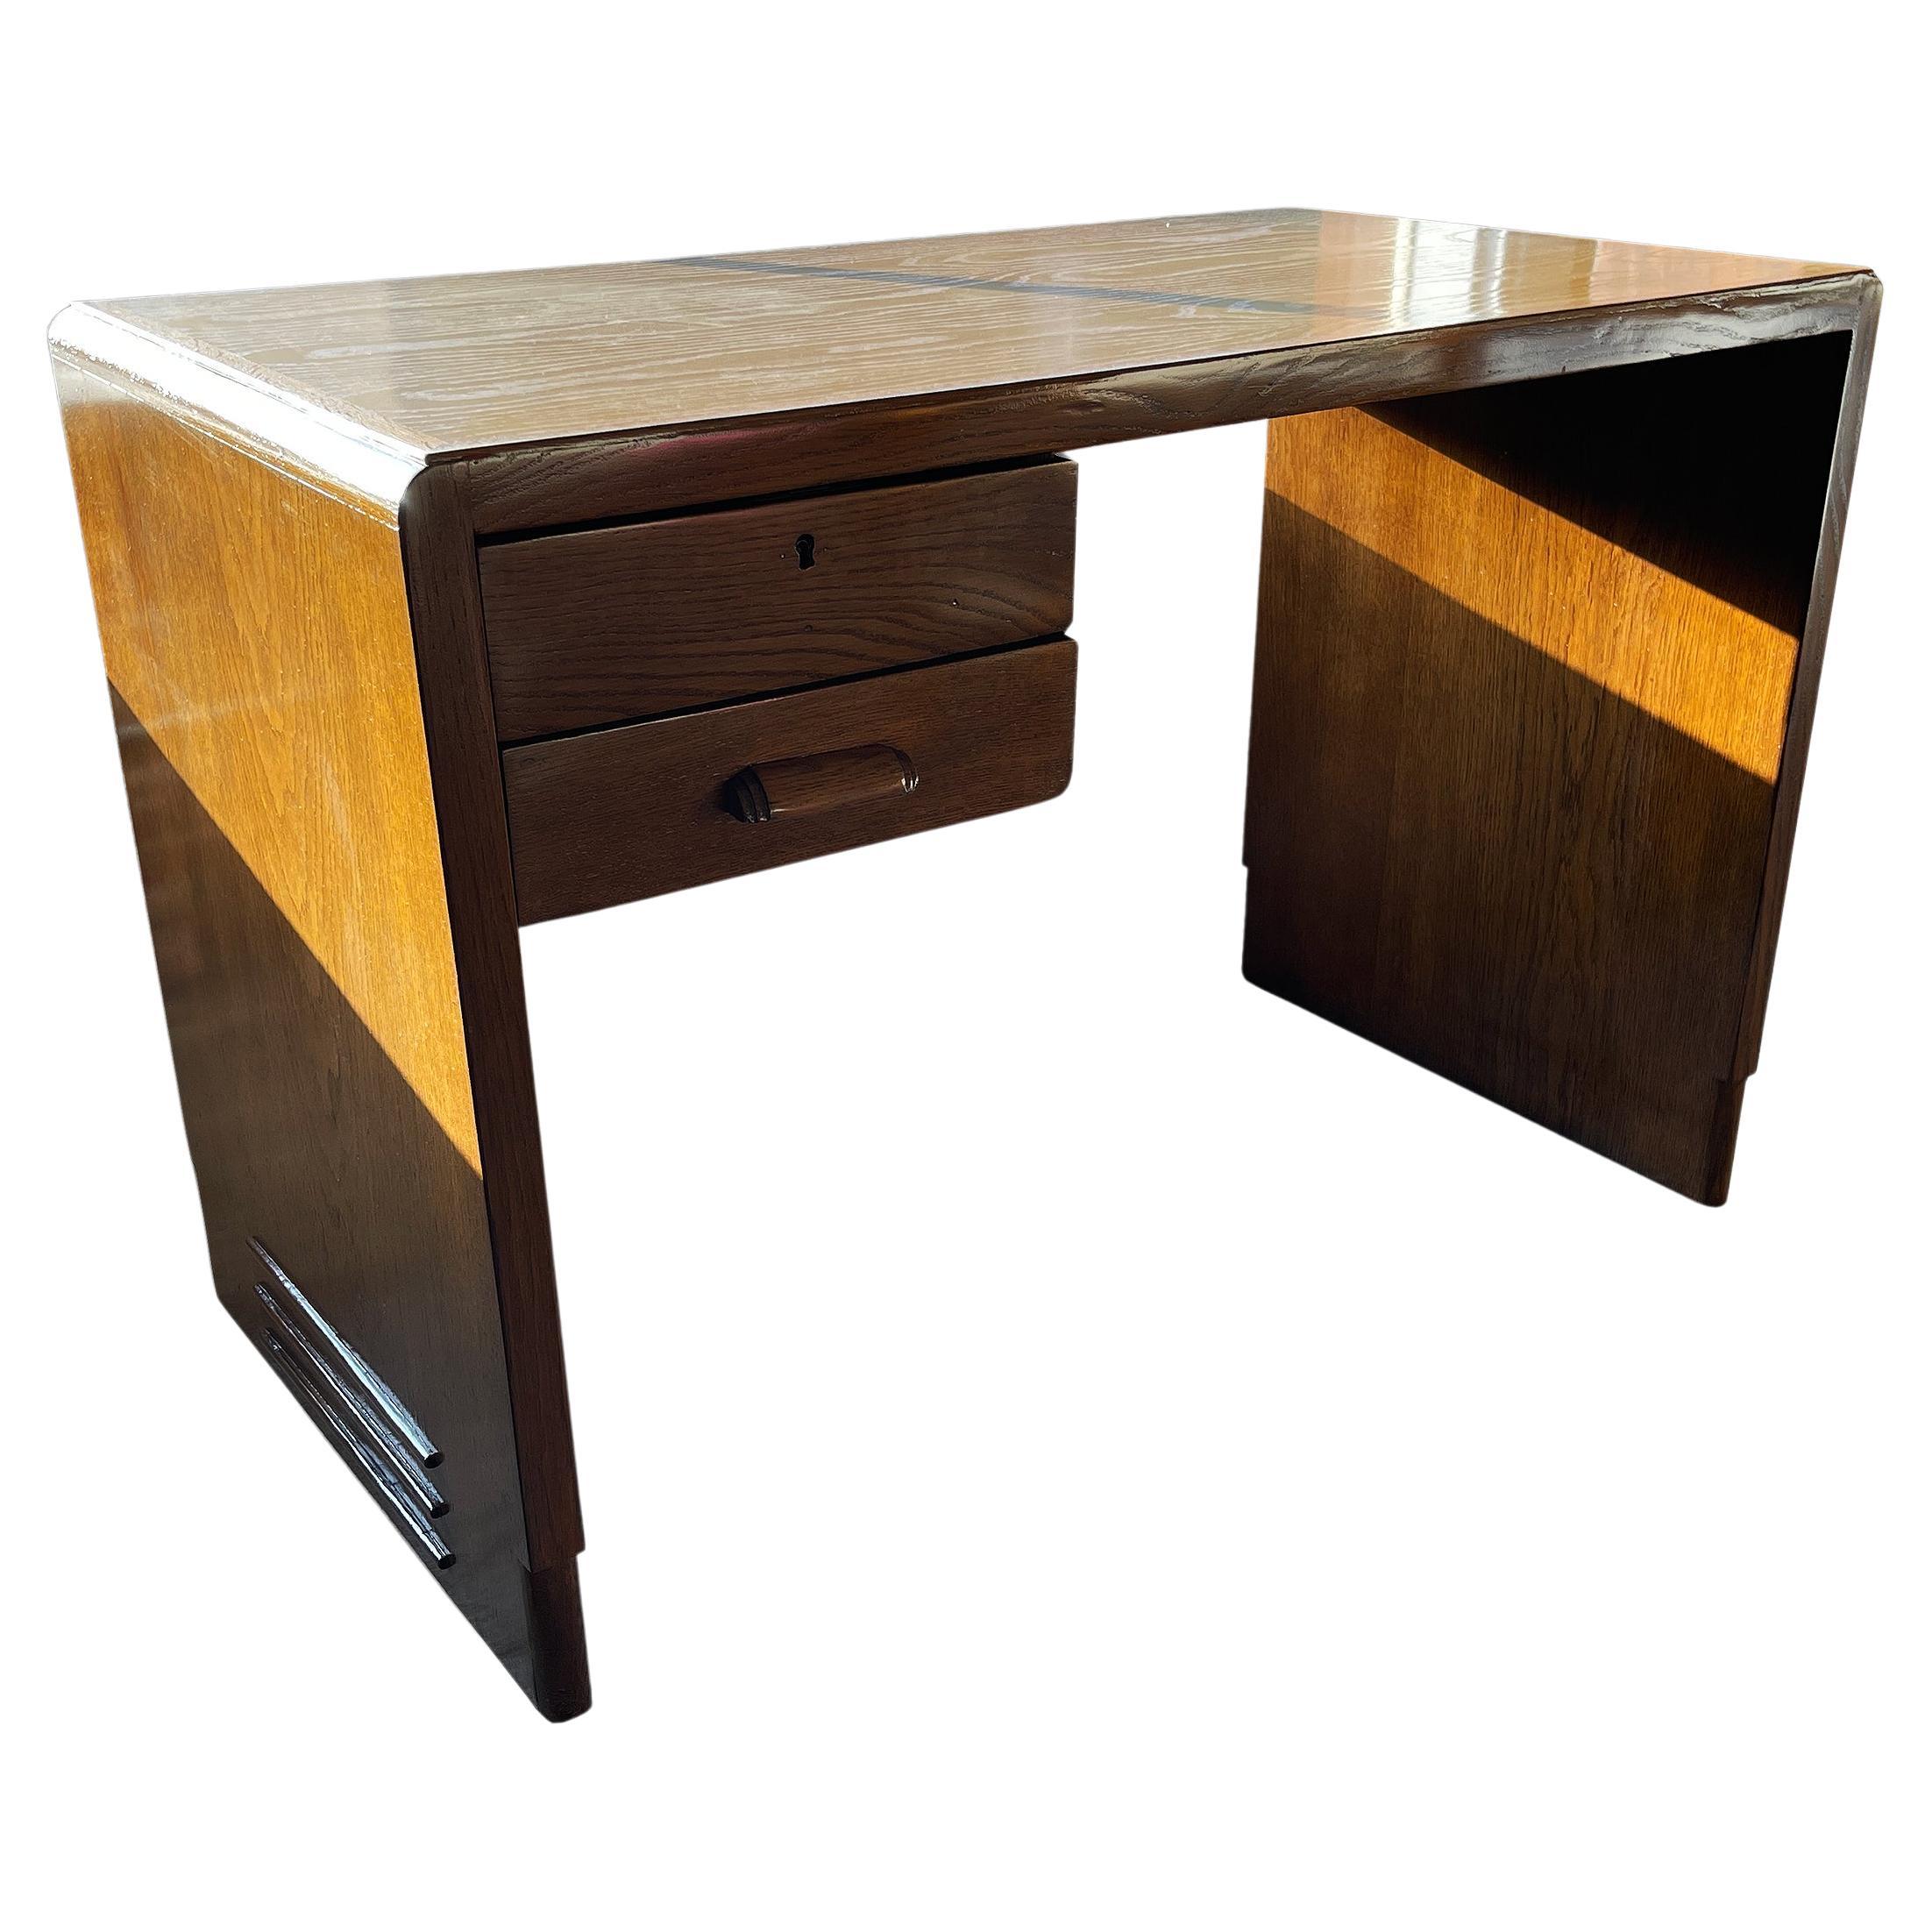 Jean Pascaud Student Desk in wood 1930 - Wooden top For Sale